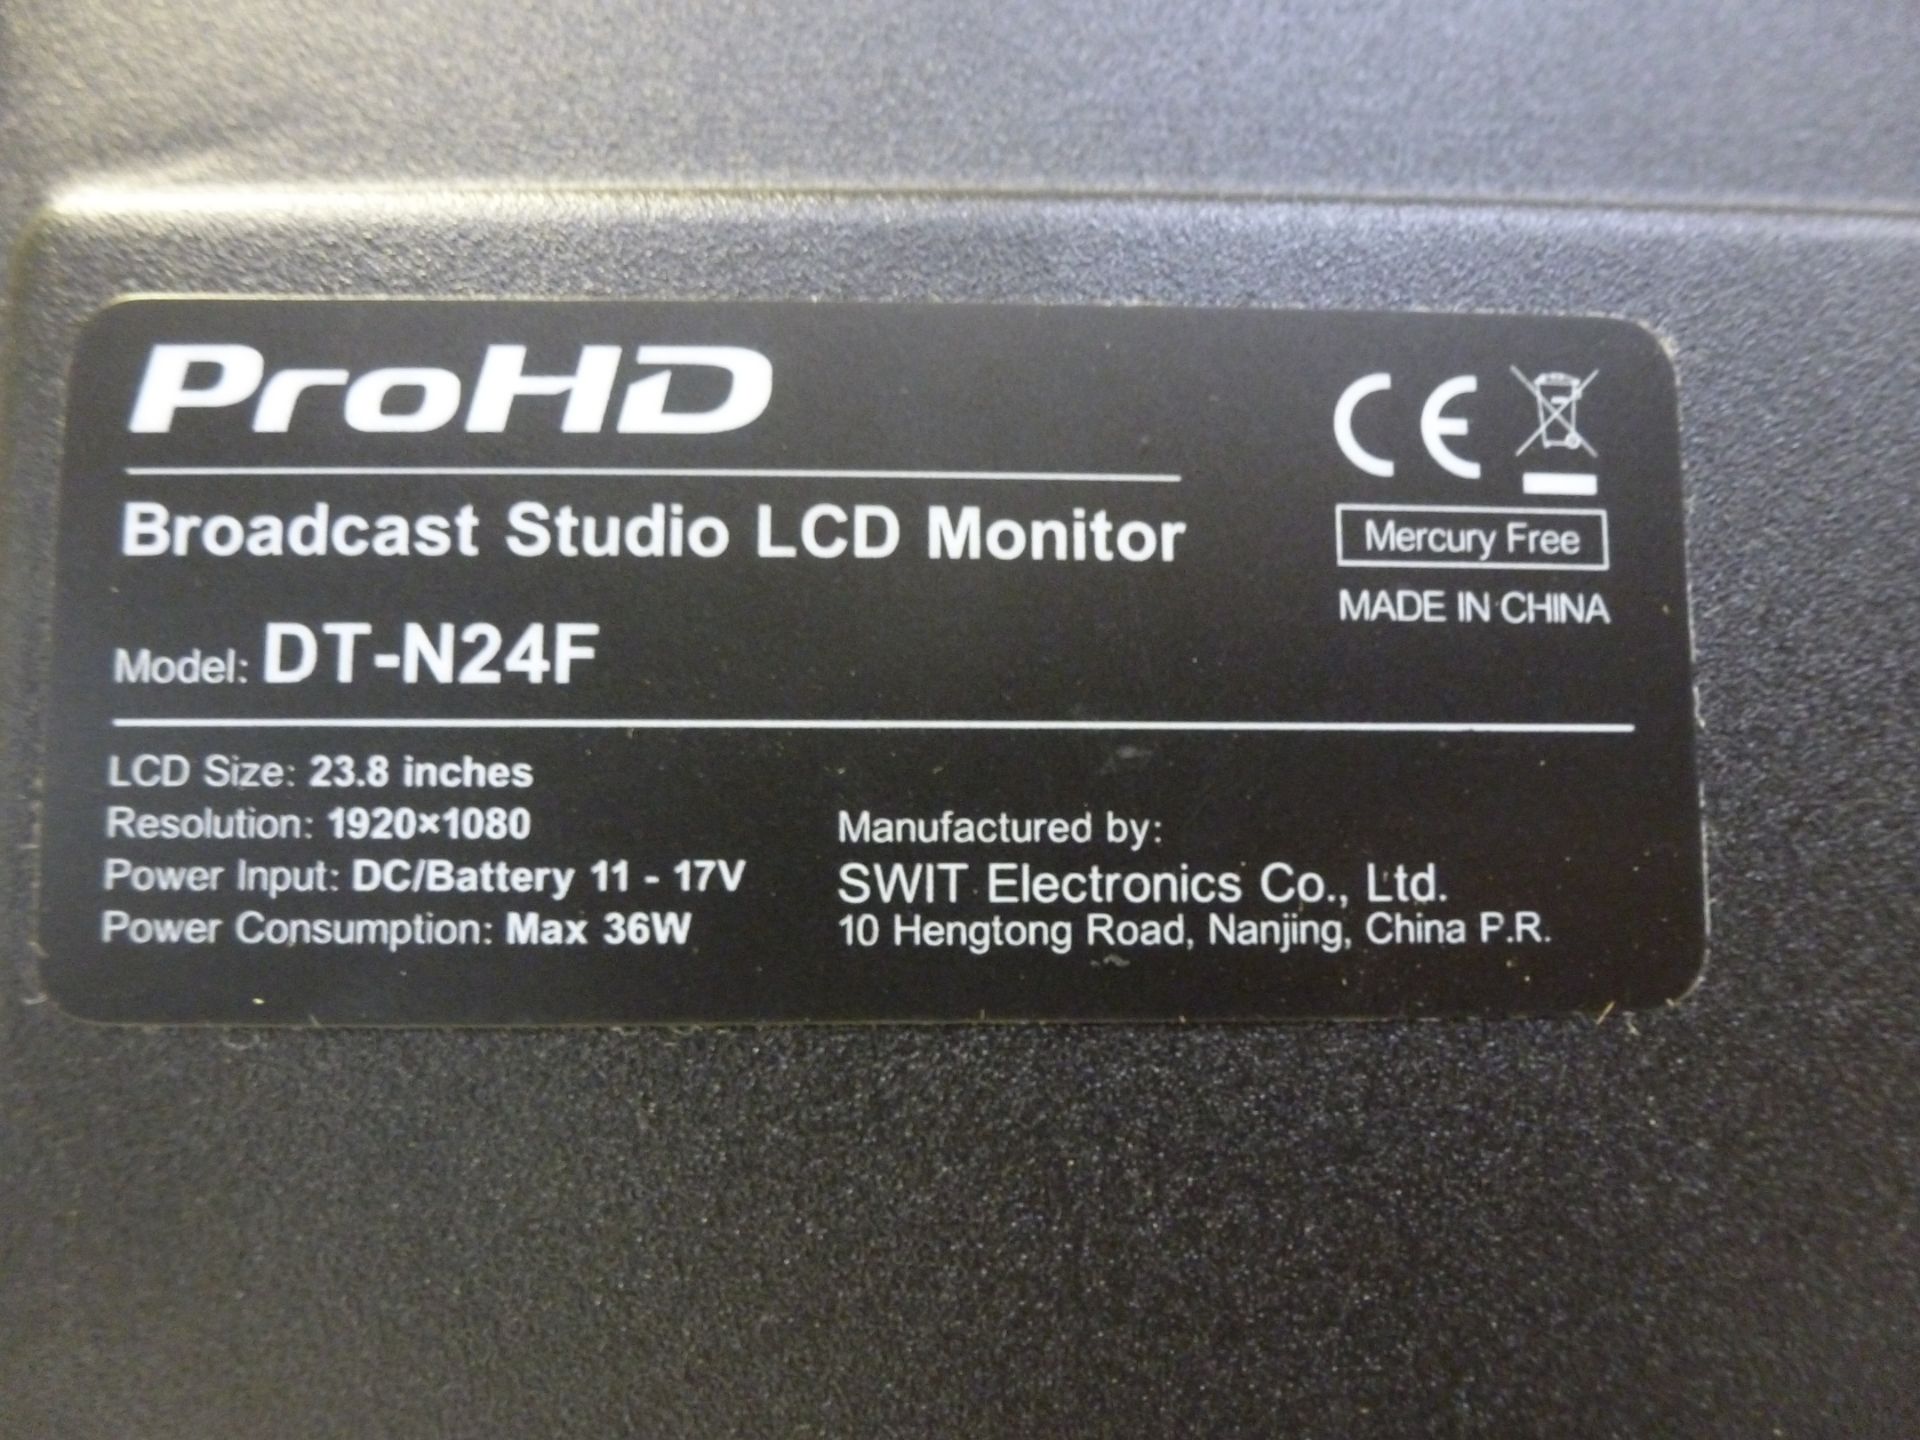 Pro HD 24" Broadcast Panel Studio LCD Monitor, Model DT-N24F, S/n 00090779. Comes with Power - Image 6 of 8